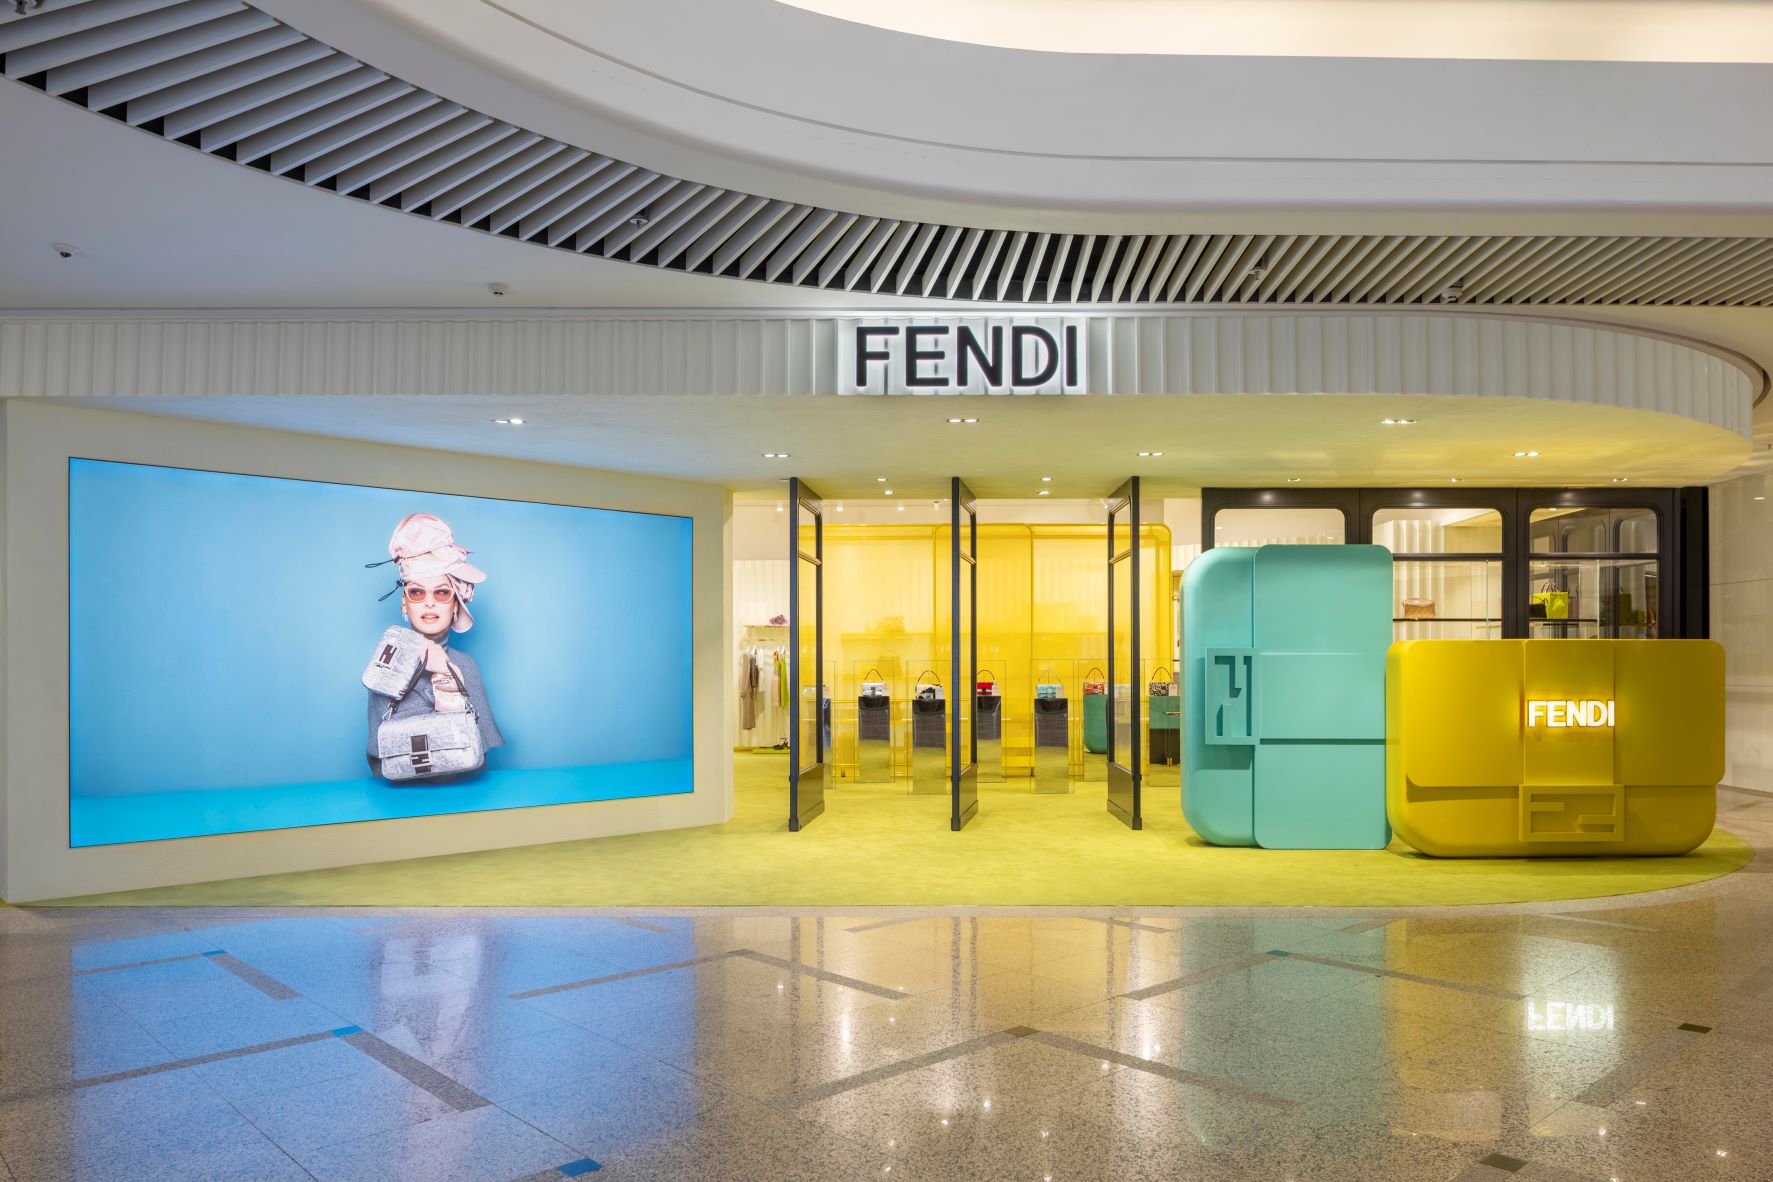 What is Fendi's marketing strategy?